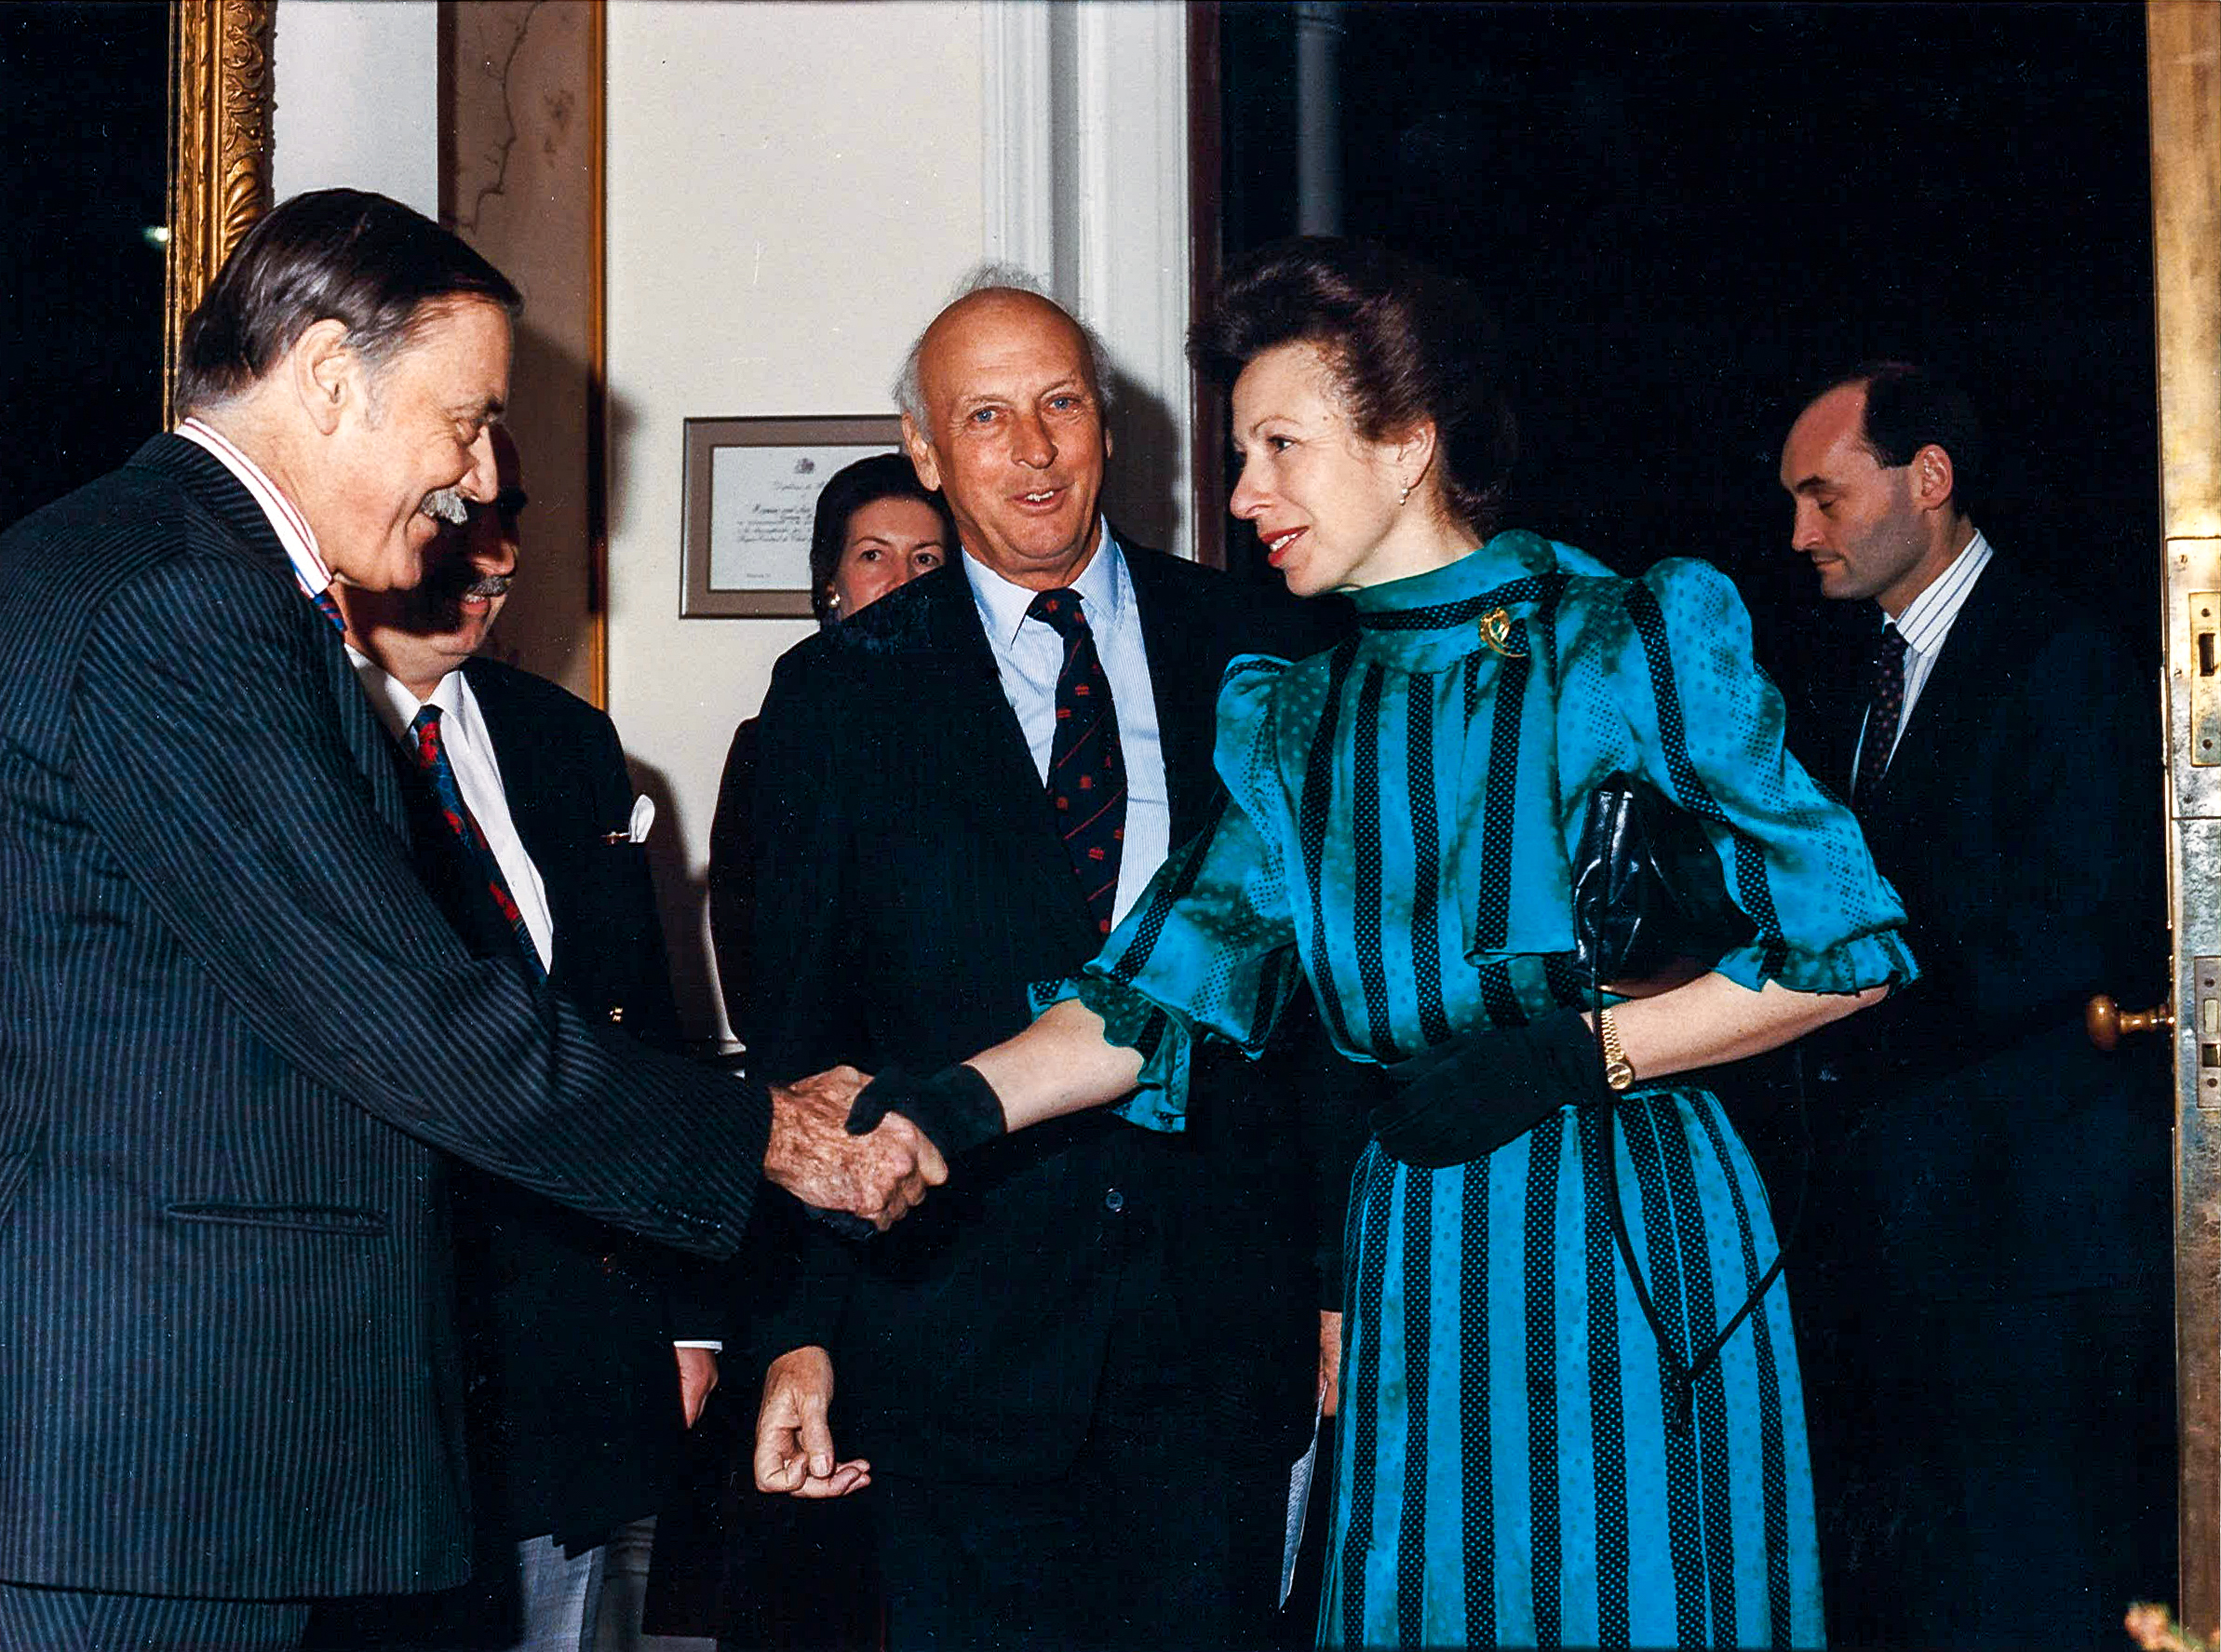 Viscount Montgomery with HRH The Princess Royal and other senior Canning House figures in 1992